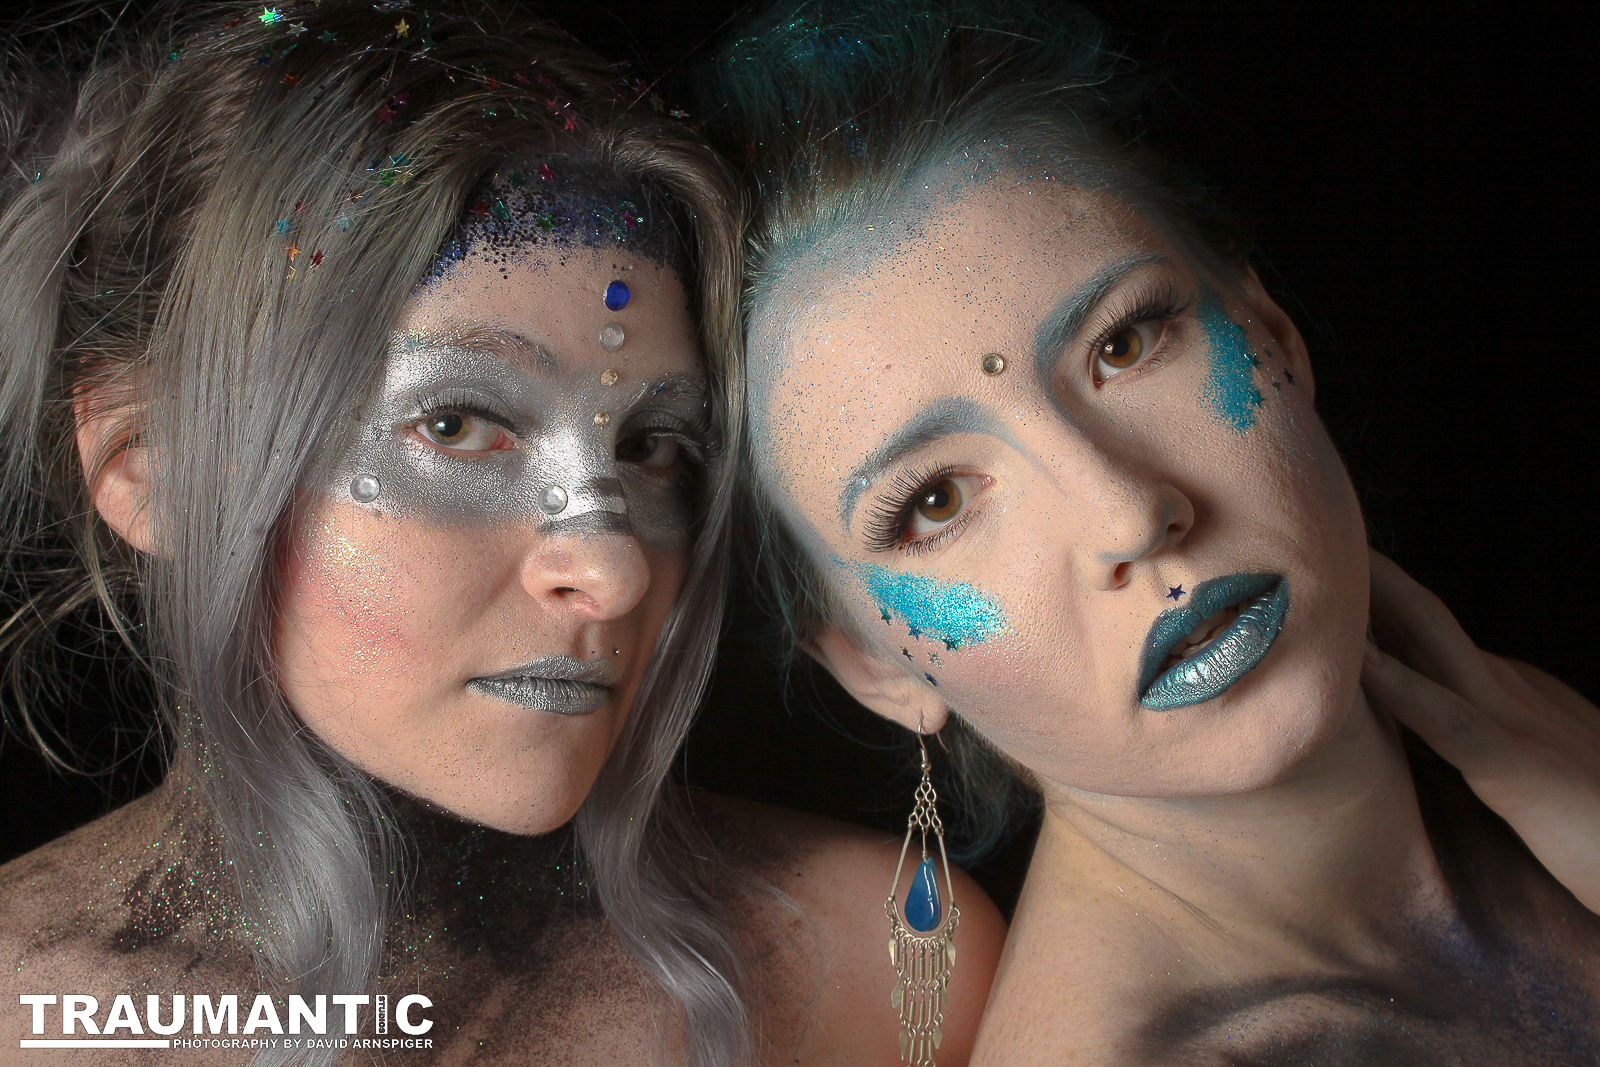 Part of my Faces project.  Galadriel and Mollie wanted to participate and had an idea for a look.  We played and got some great results.